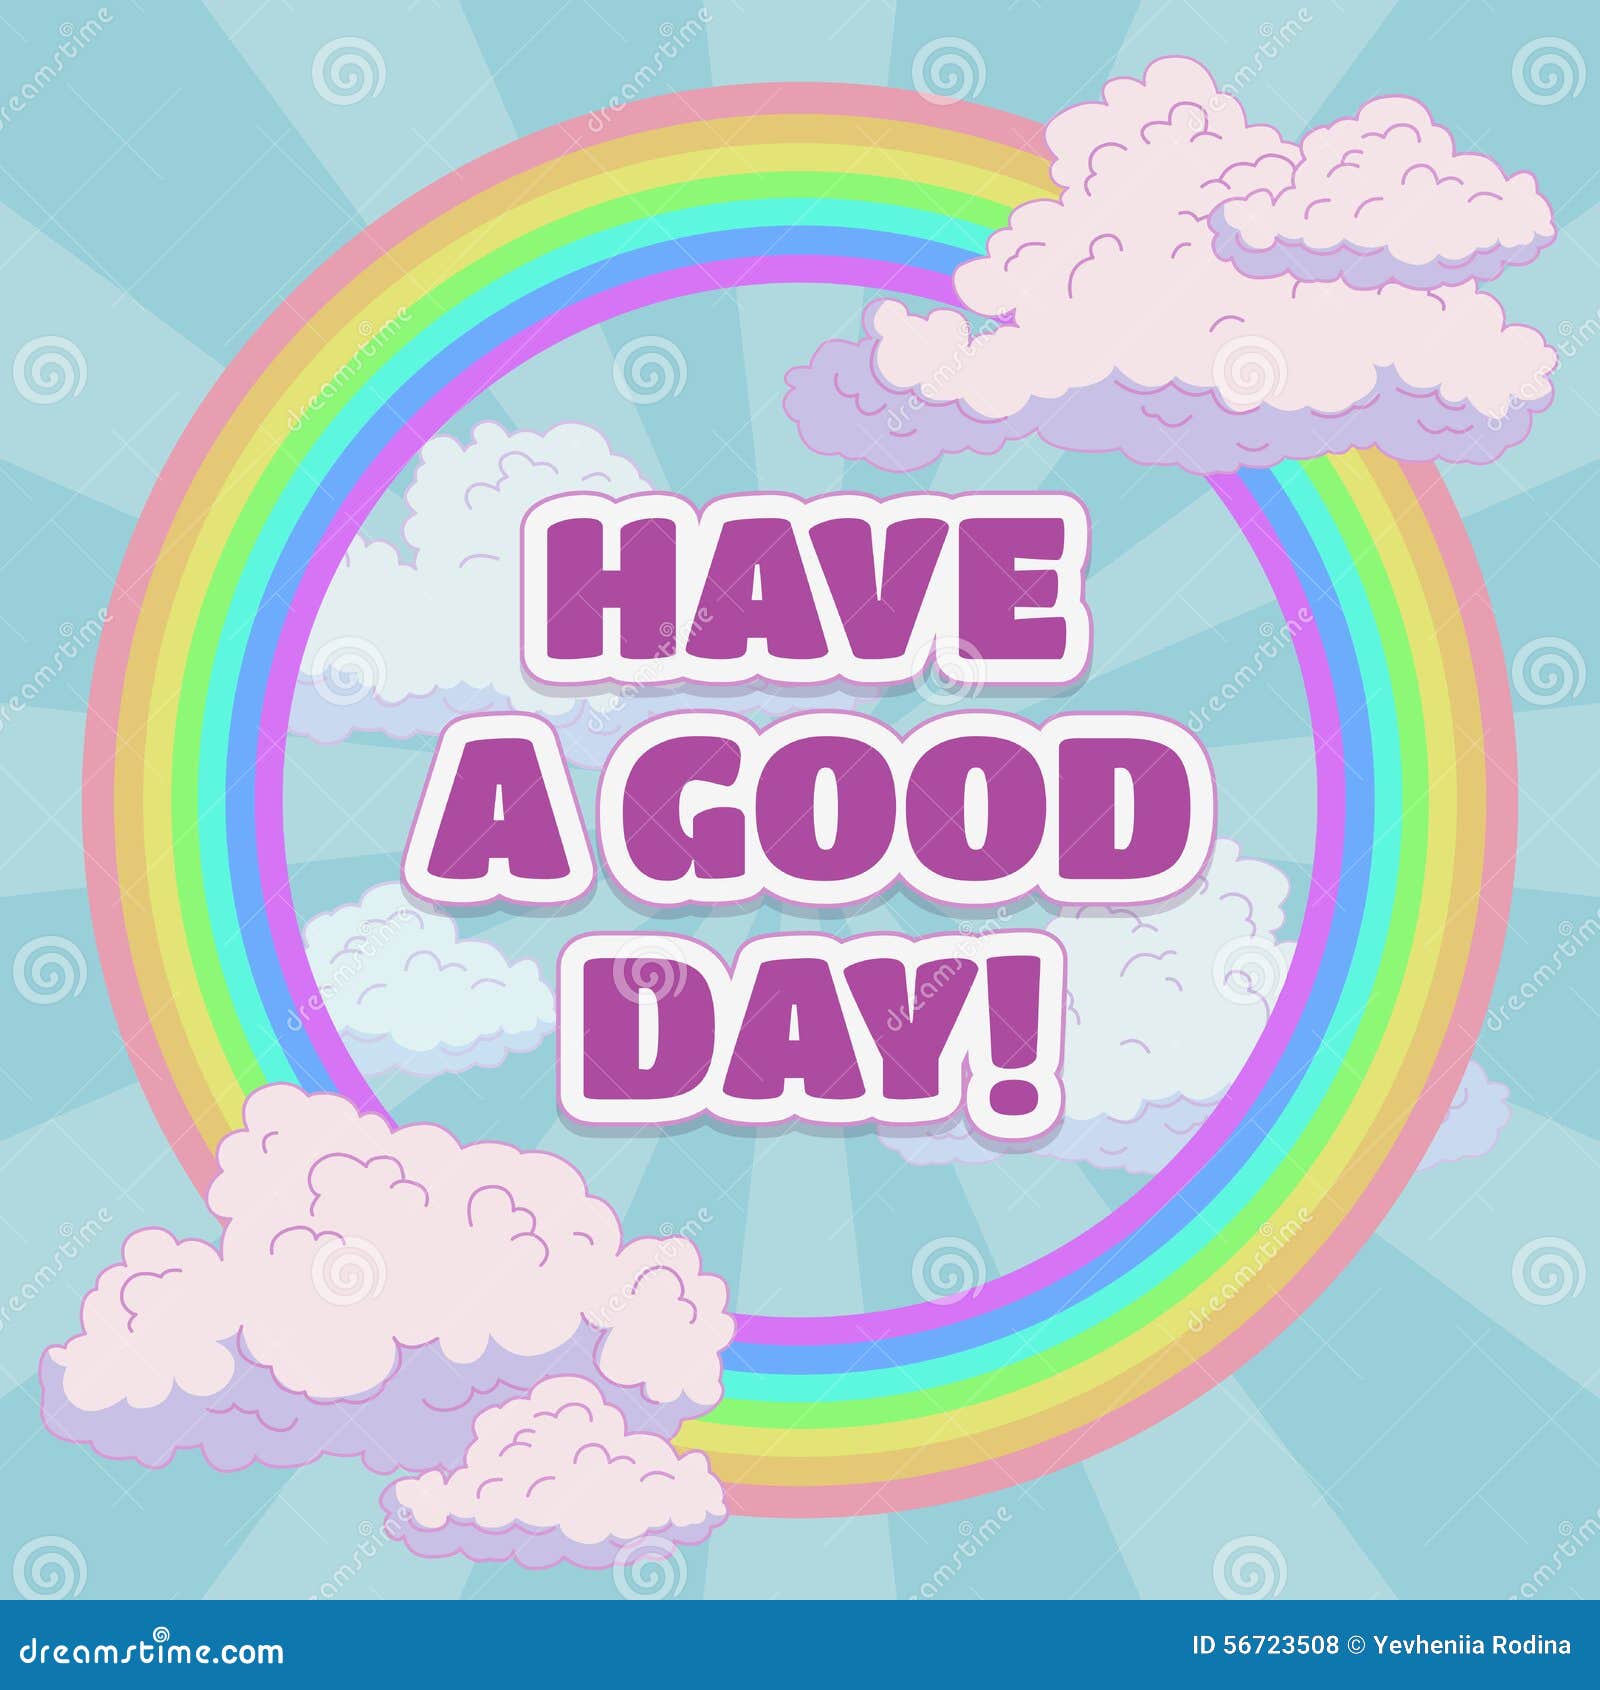 clipart have a good day - photo #21